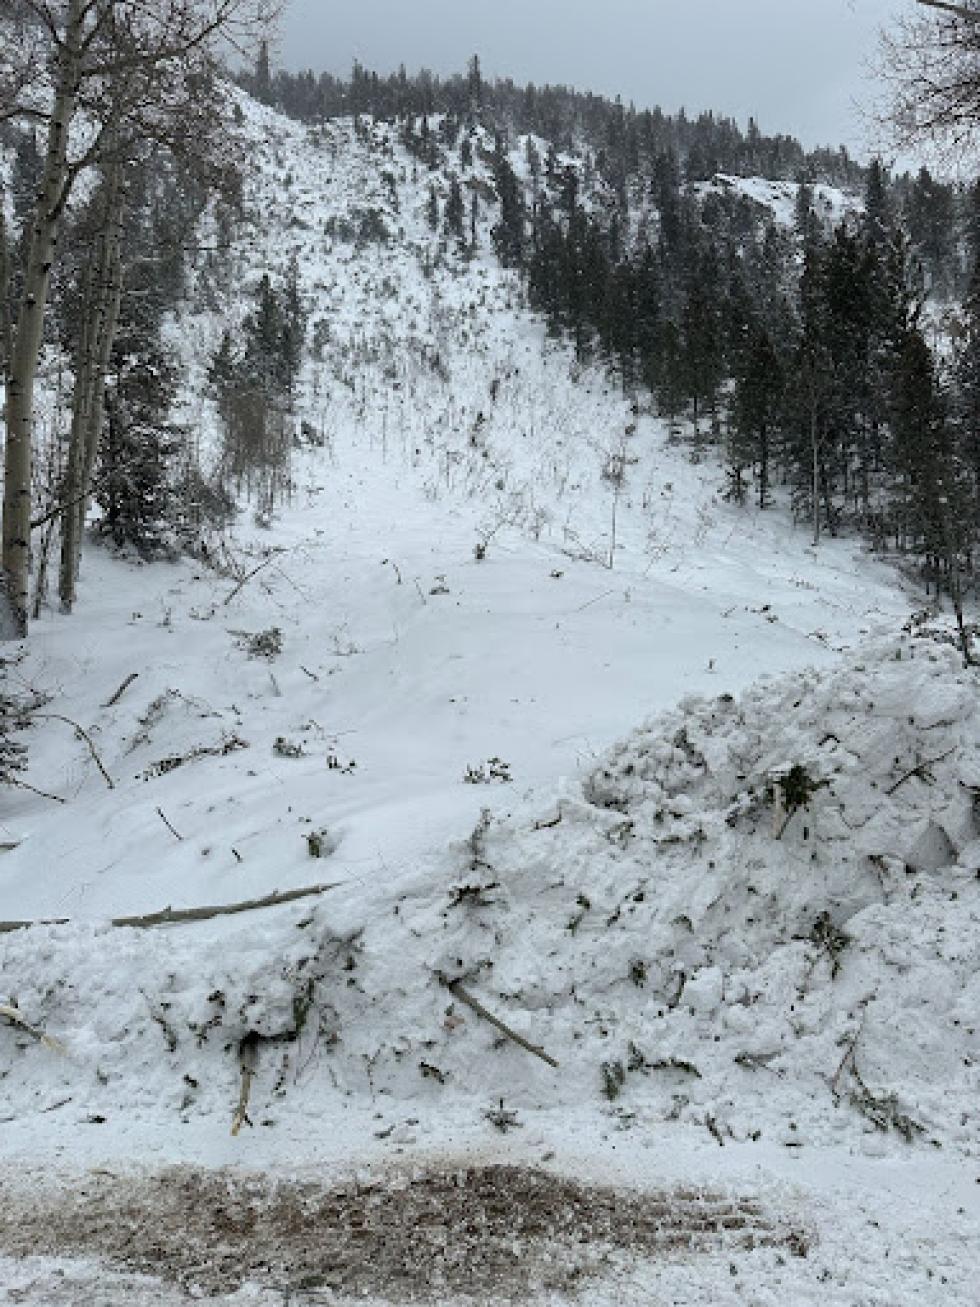 This large avalanche crossed a county road in Chaffee County on March 15, 2024. This is the most significant avalanche in this path since March of 2019. Eastern areas of the Sawatch had a very thin and weak snowpack until more significant snow arrived in March, easily overloading this snowpack.